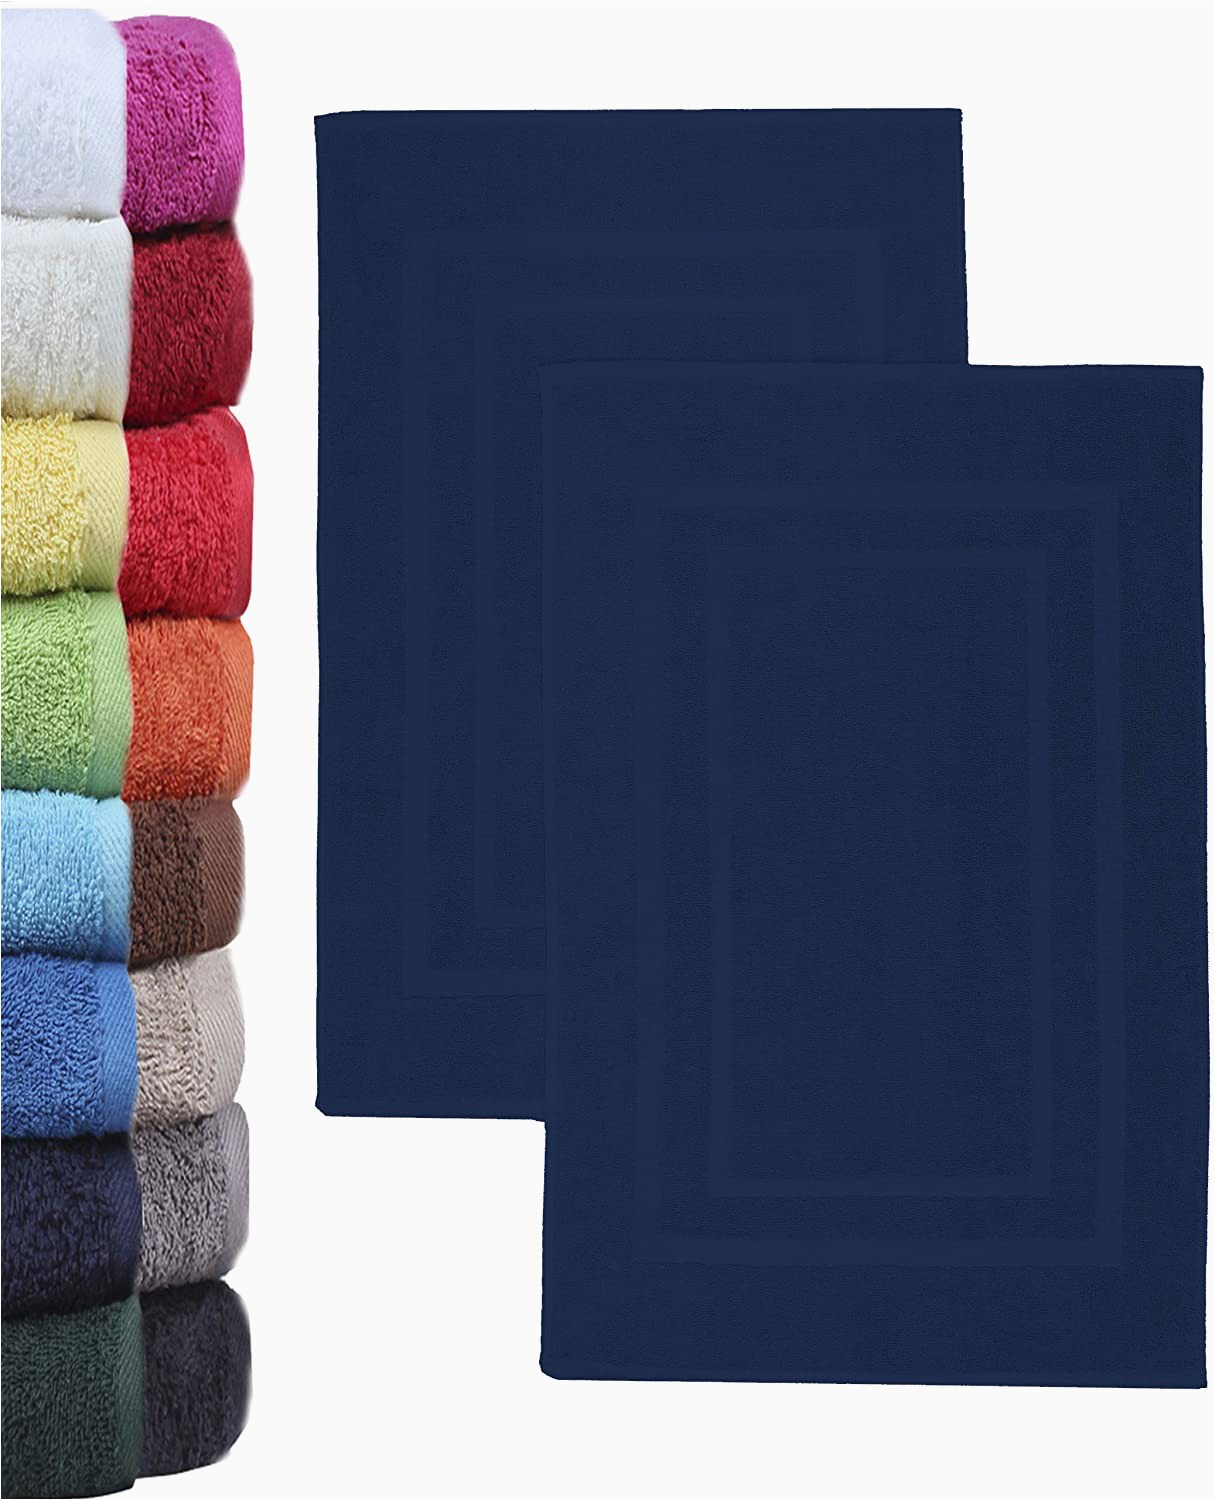 Terry Cloth Bath Rug Naturemark Pack Of 2 Terry towelling Bath Mats 50 X 80 Cm Cotton Navy Blue